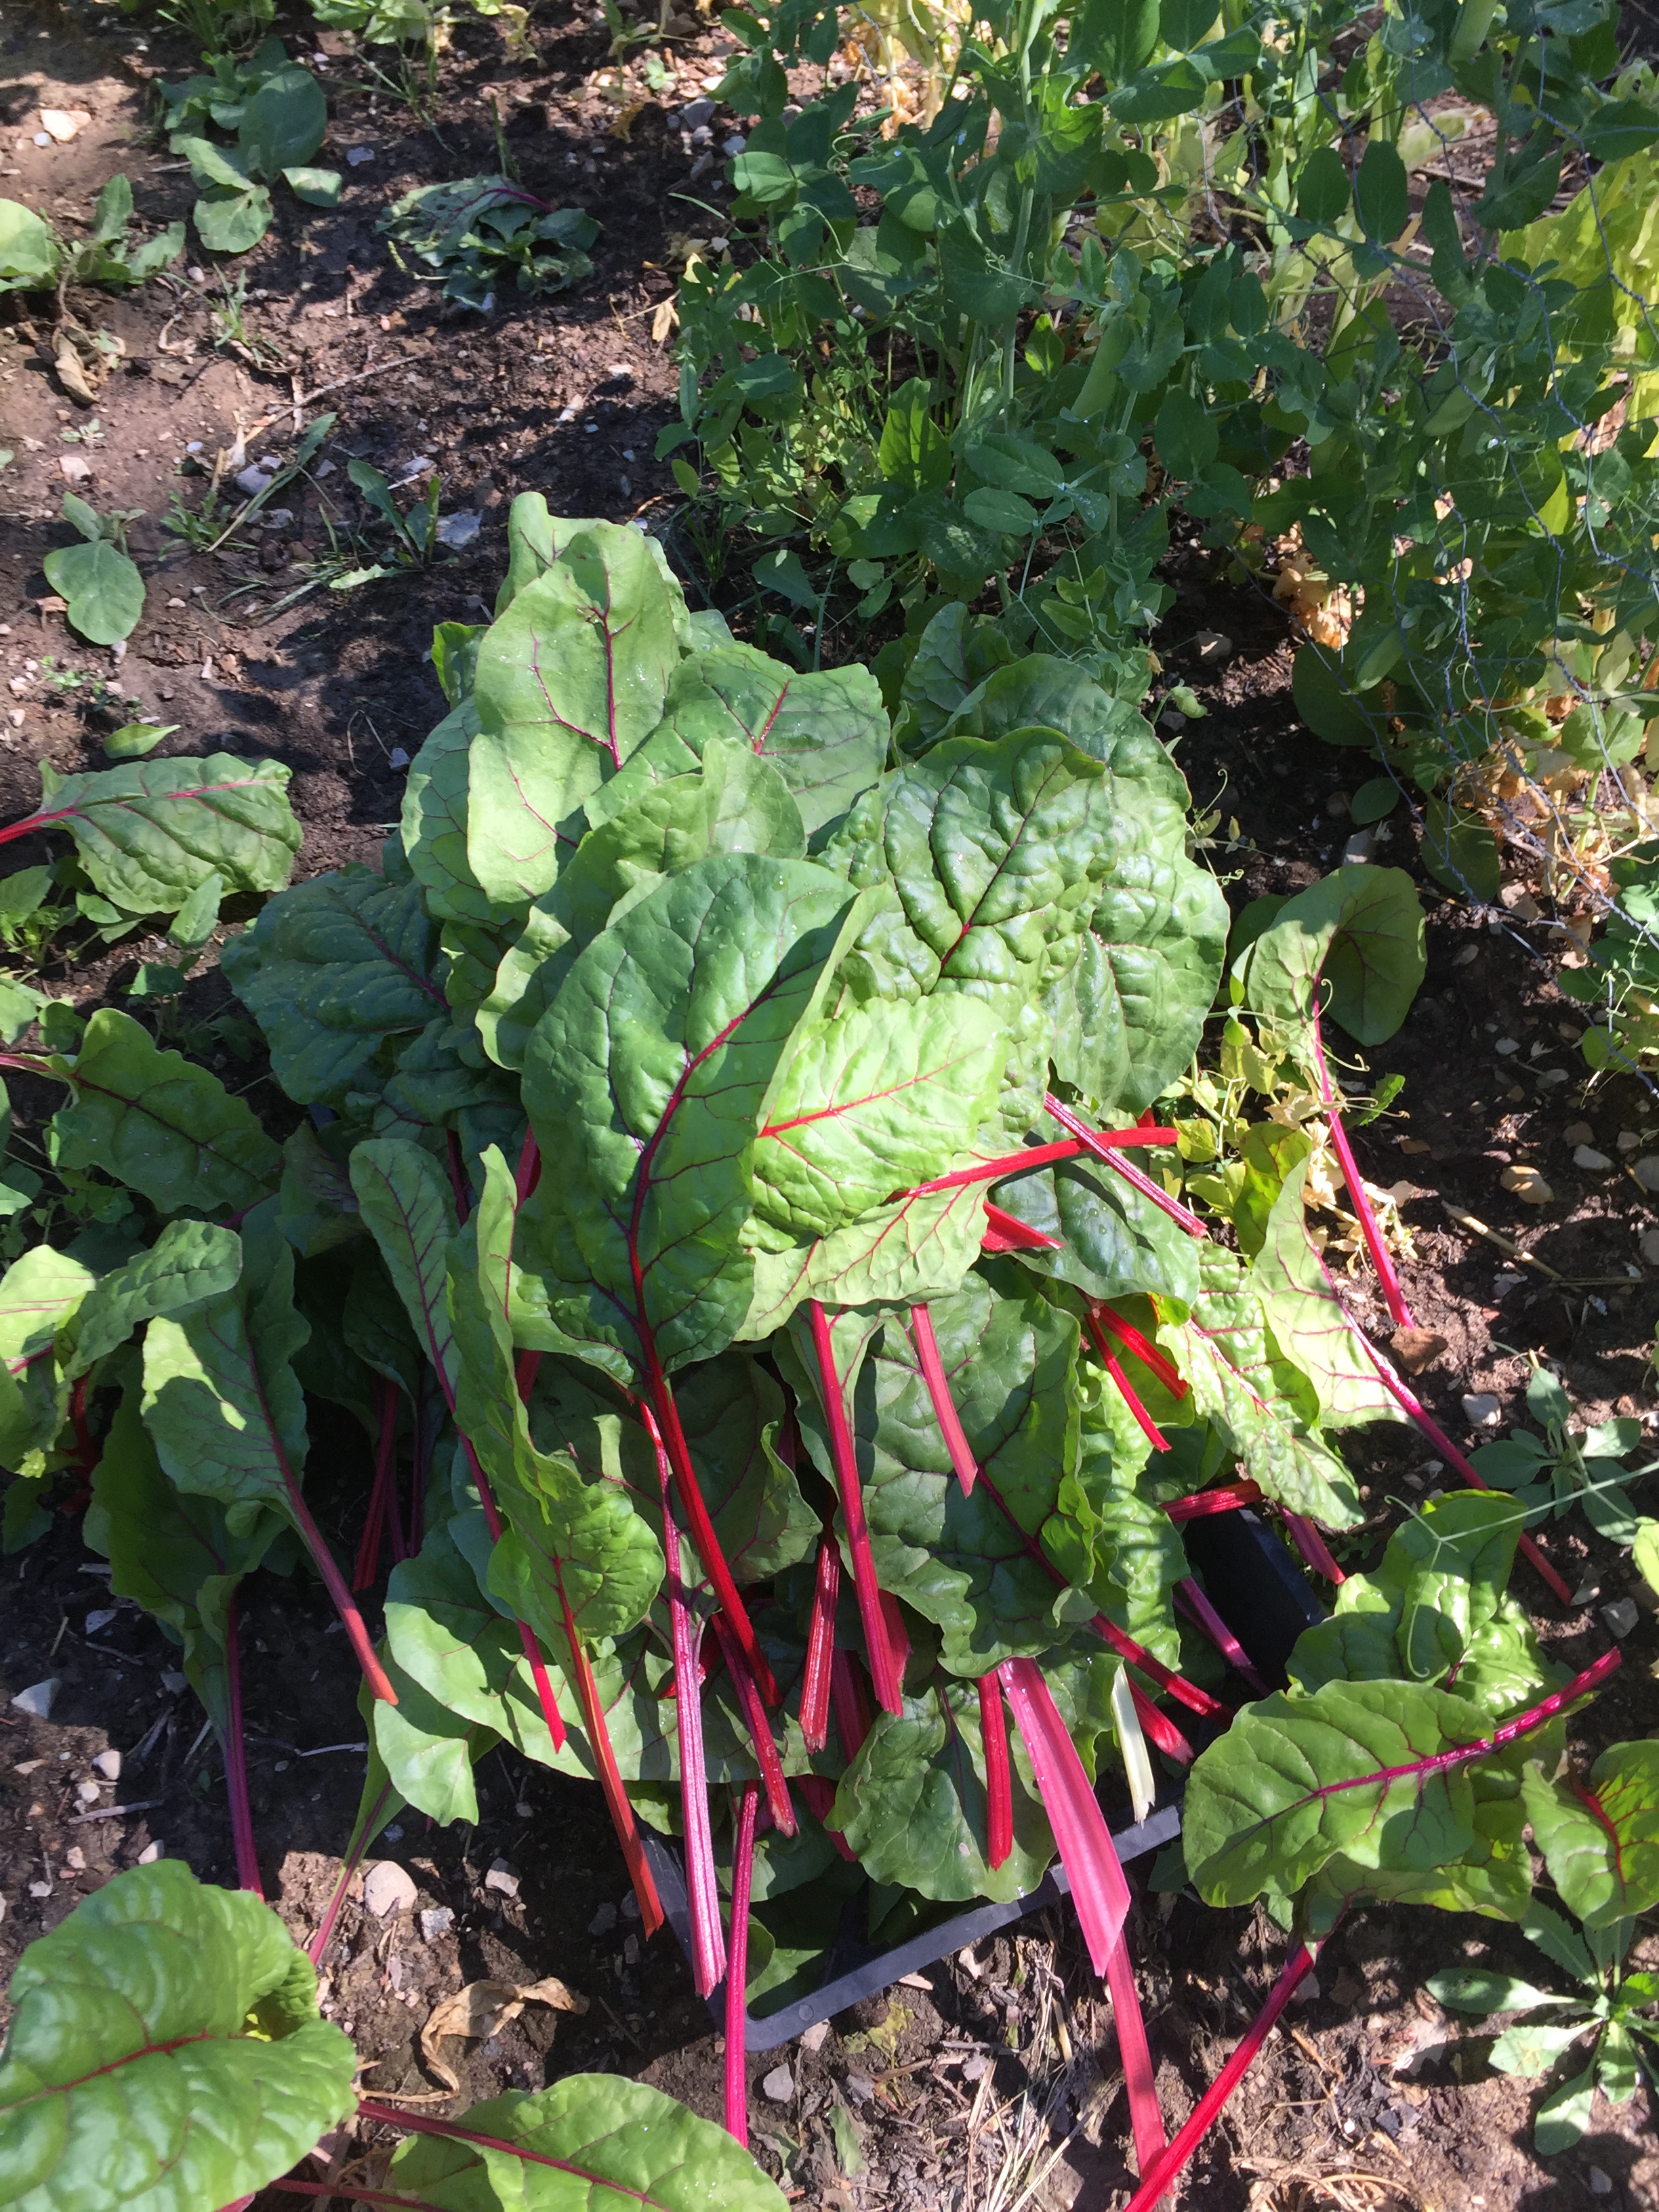 Pile of Swiss Chard for market